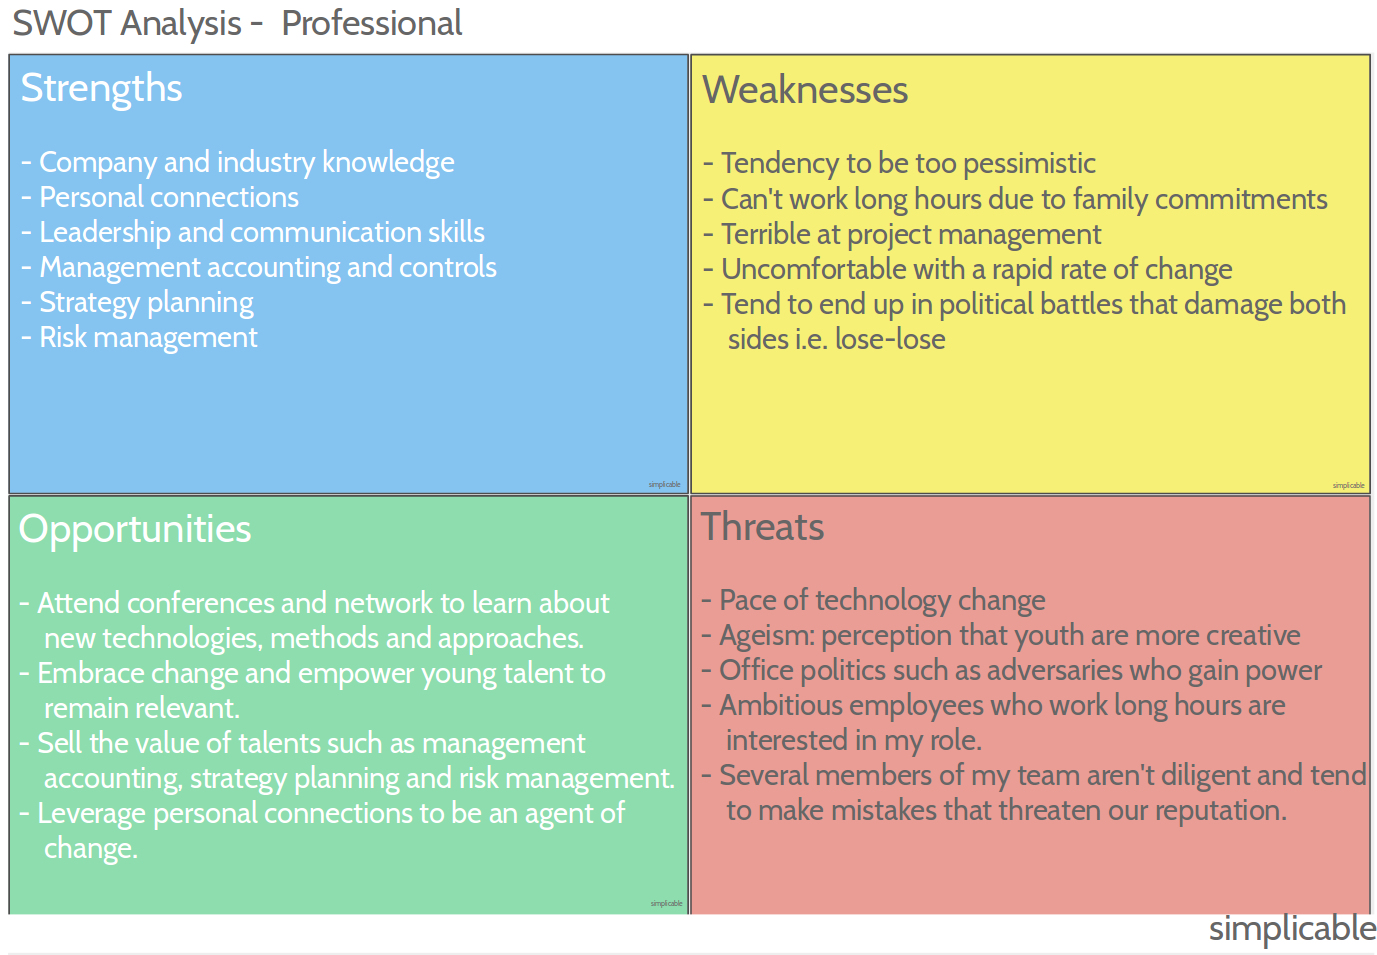 Example of a swot analysis for an IT professional who wants to defend their position in an environment of increasing competition, political rivalries and a fast pace of change.